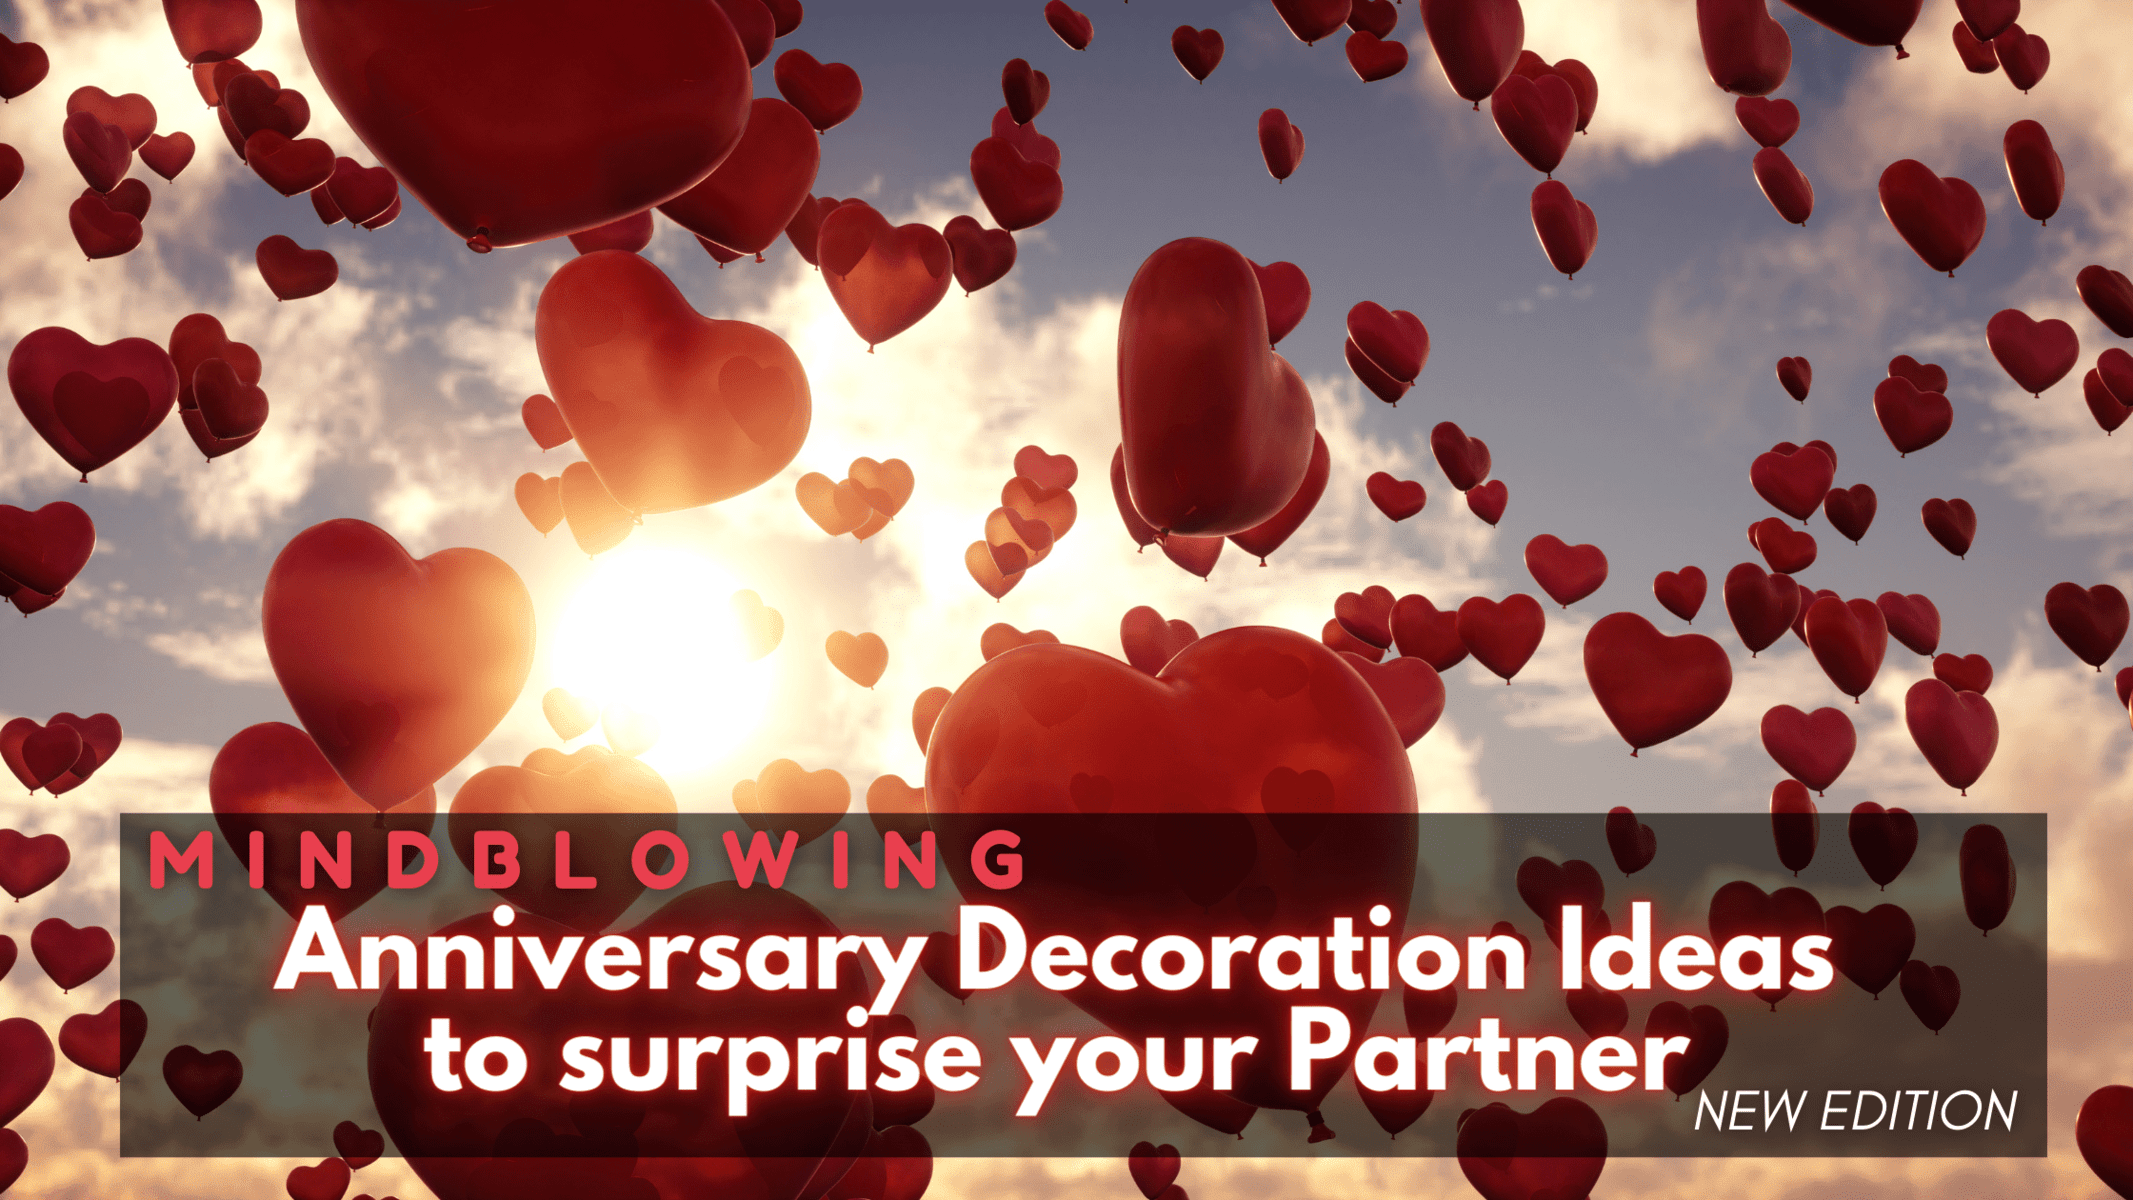 Mindblowing Anniversary Decoration Ideas to surprise your Partner in 2023